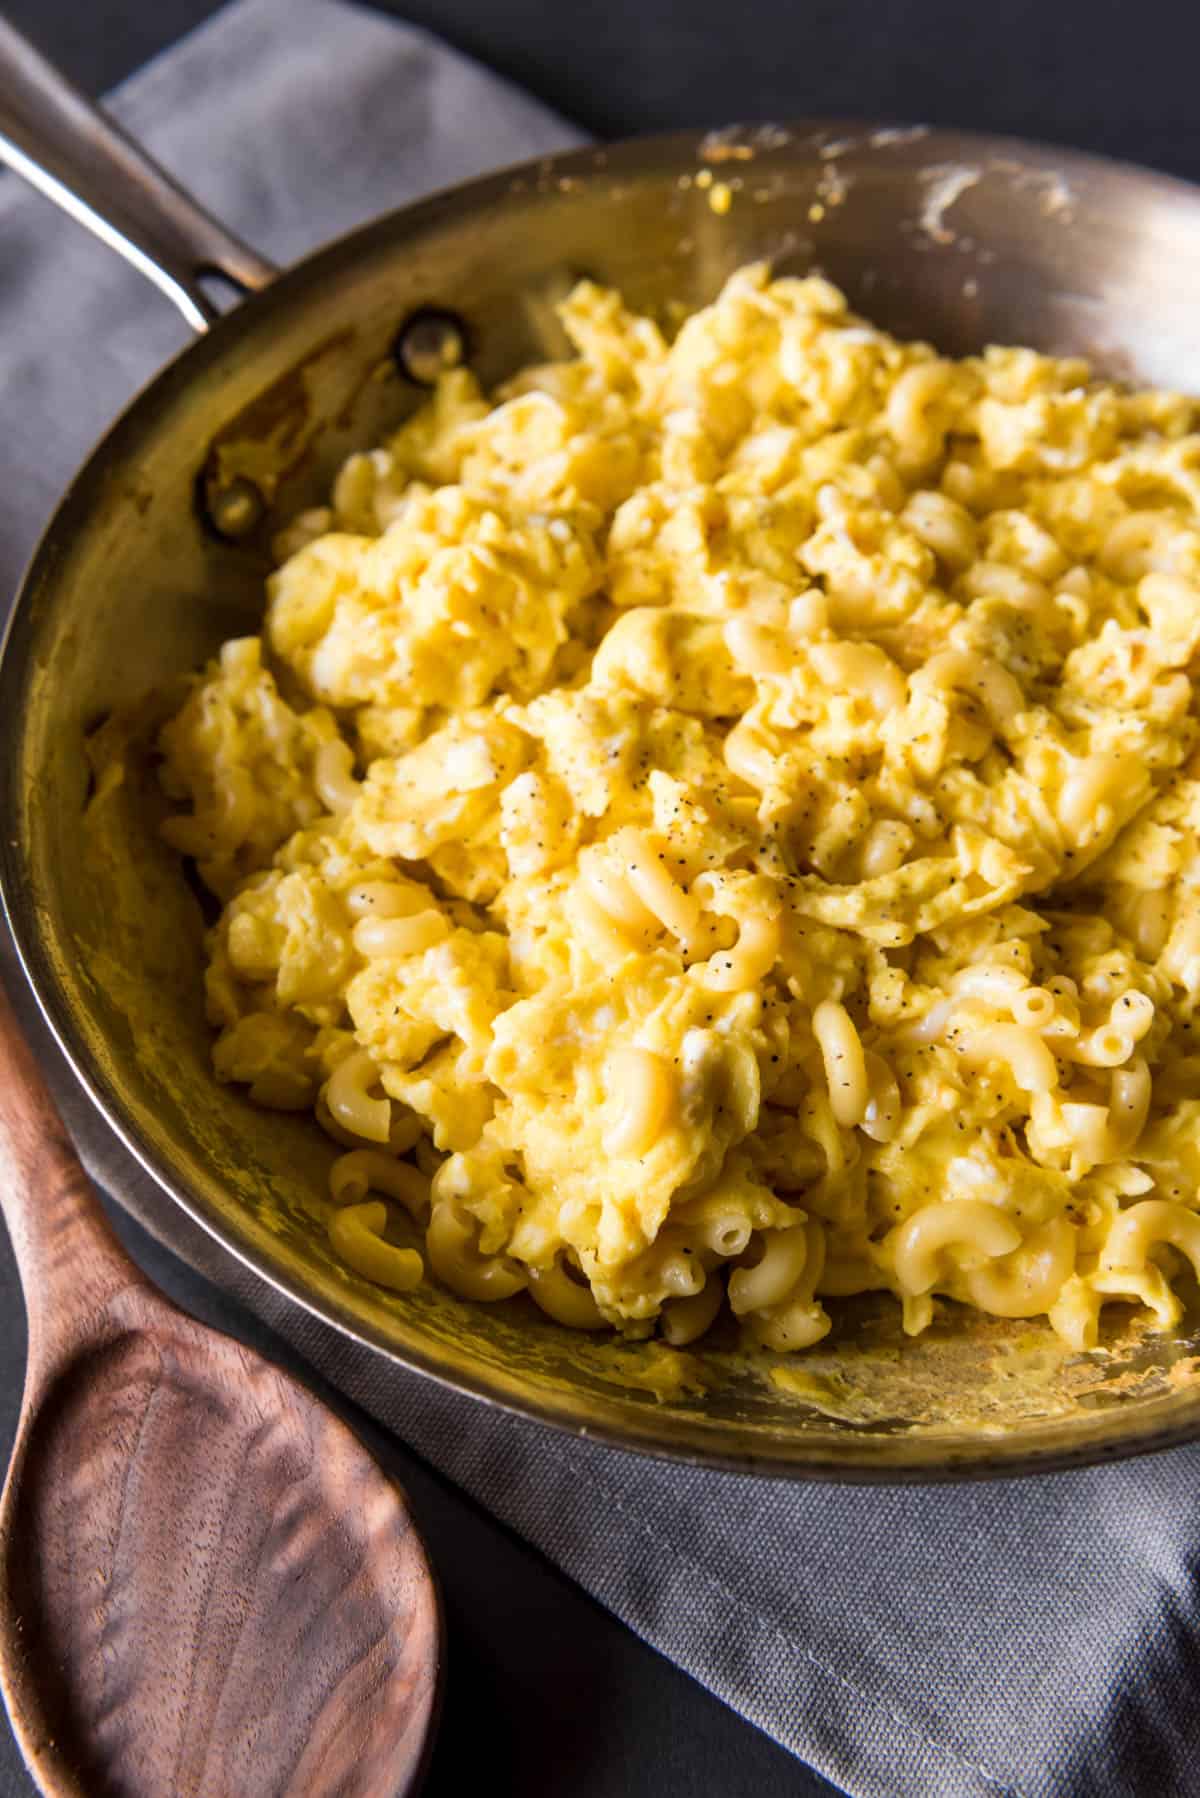 Scrambled eggs and pasta inside a skillet.